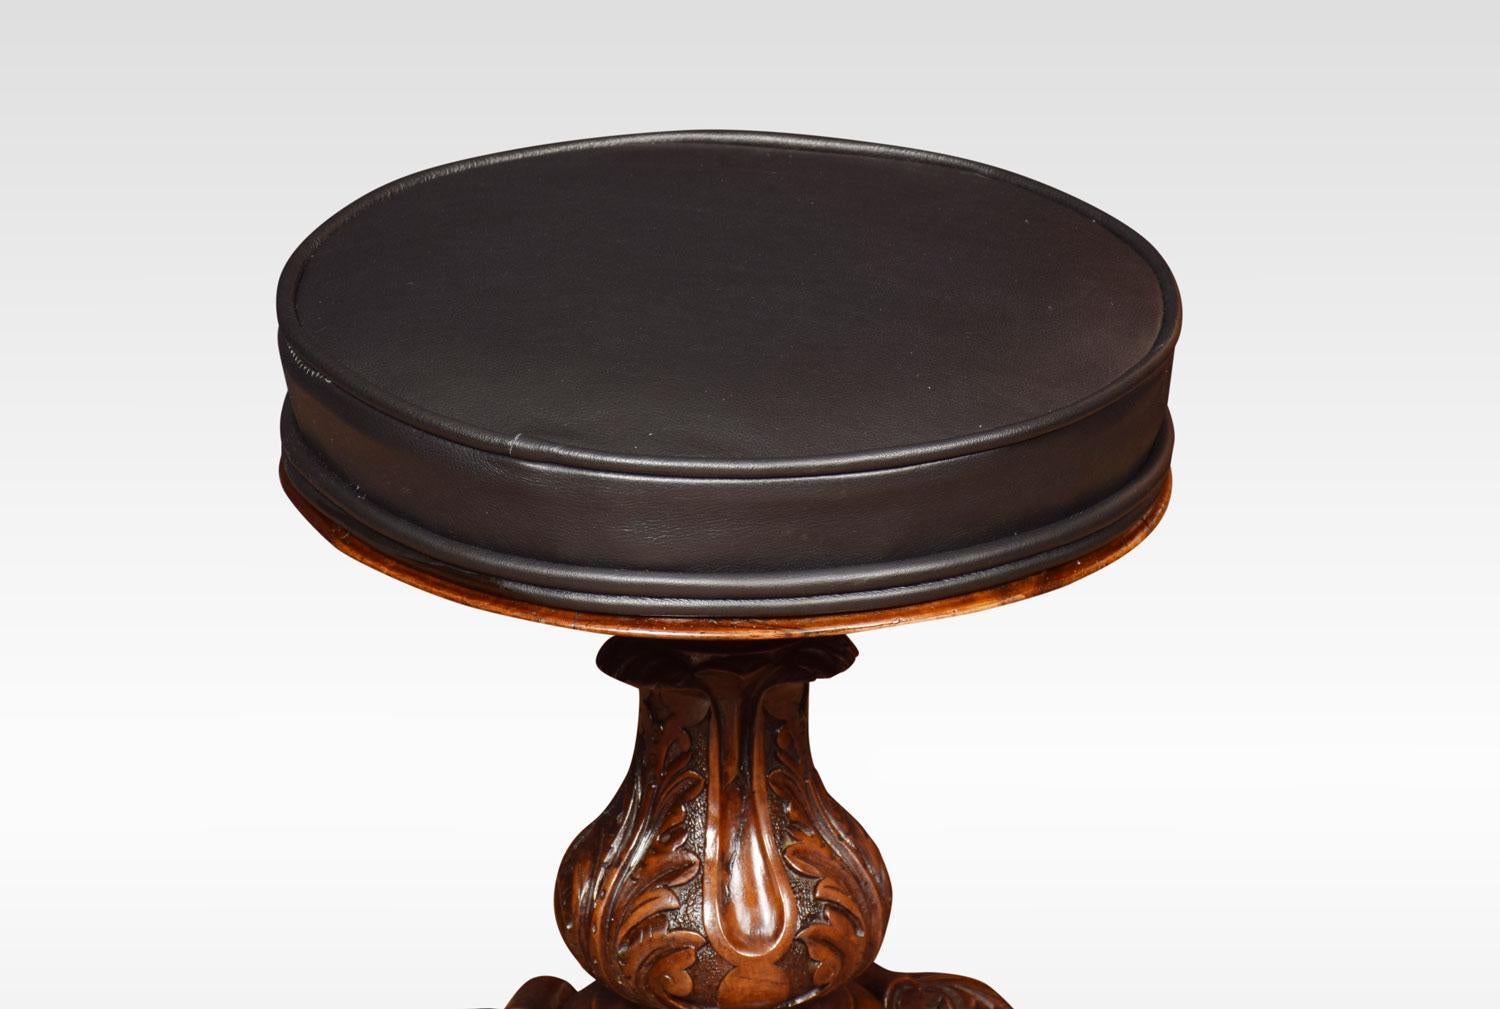 Victorian walnut adjustable piano stool with upholstered black leather seat above turned central acanthus carved column all raised up on scroll cabriole legs.
Dimensions:
Height 19 inches adjustable to 24.5 inches
Width 18.5 inches
Depth 18.5